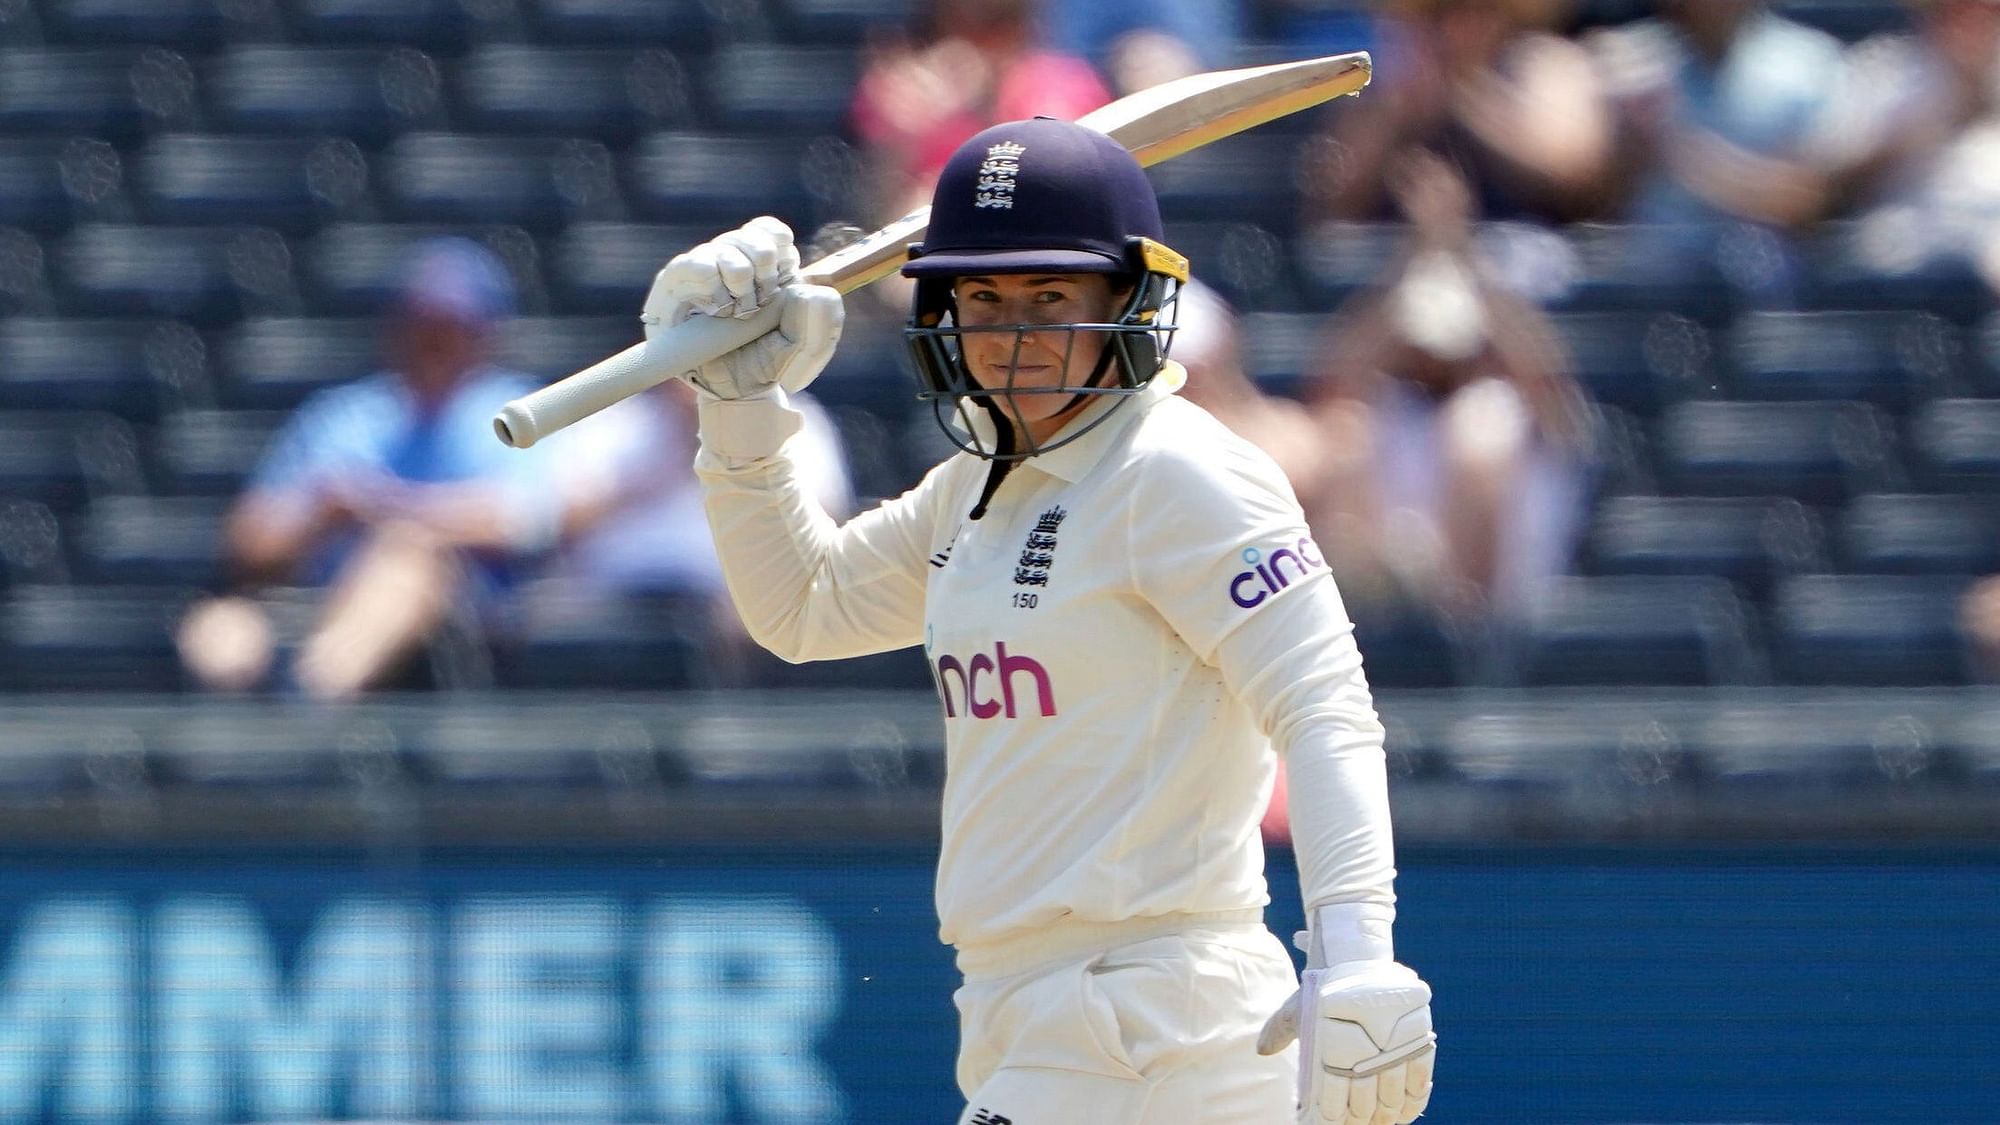 Bristol: England’s Tammy Beaumont celebrates her half-century during day one of the Women’s International Test match between England and India at the Bristol County Ground in Bristol, England, Wednesday June 16, 2021.